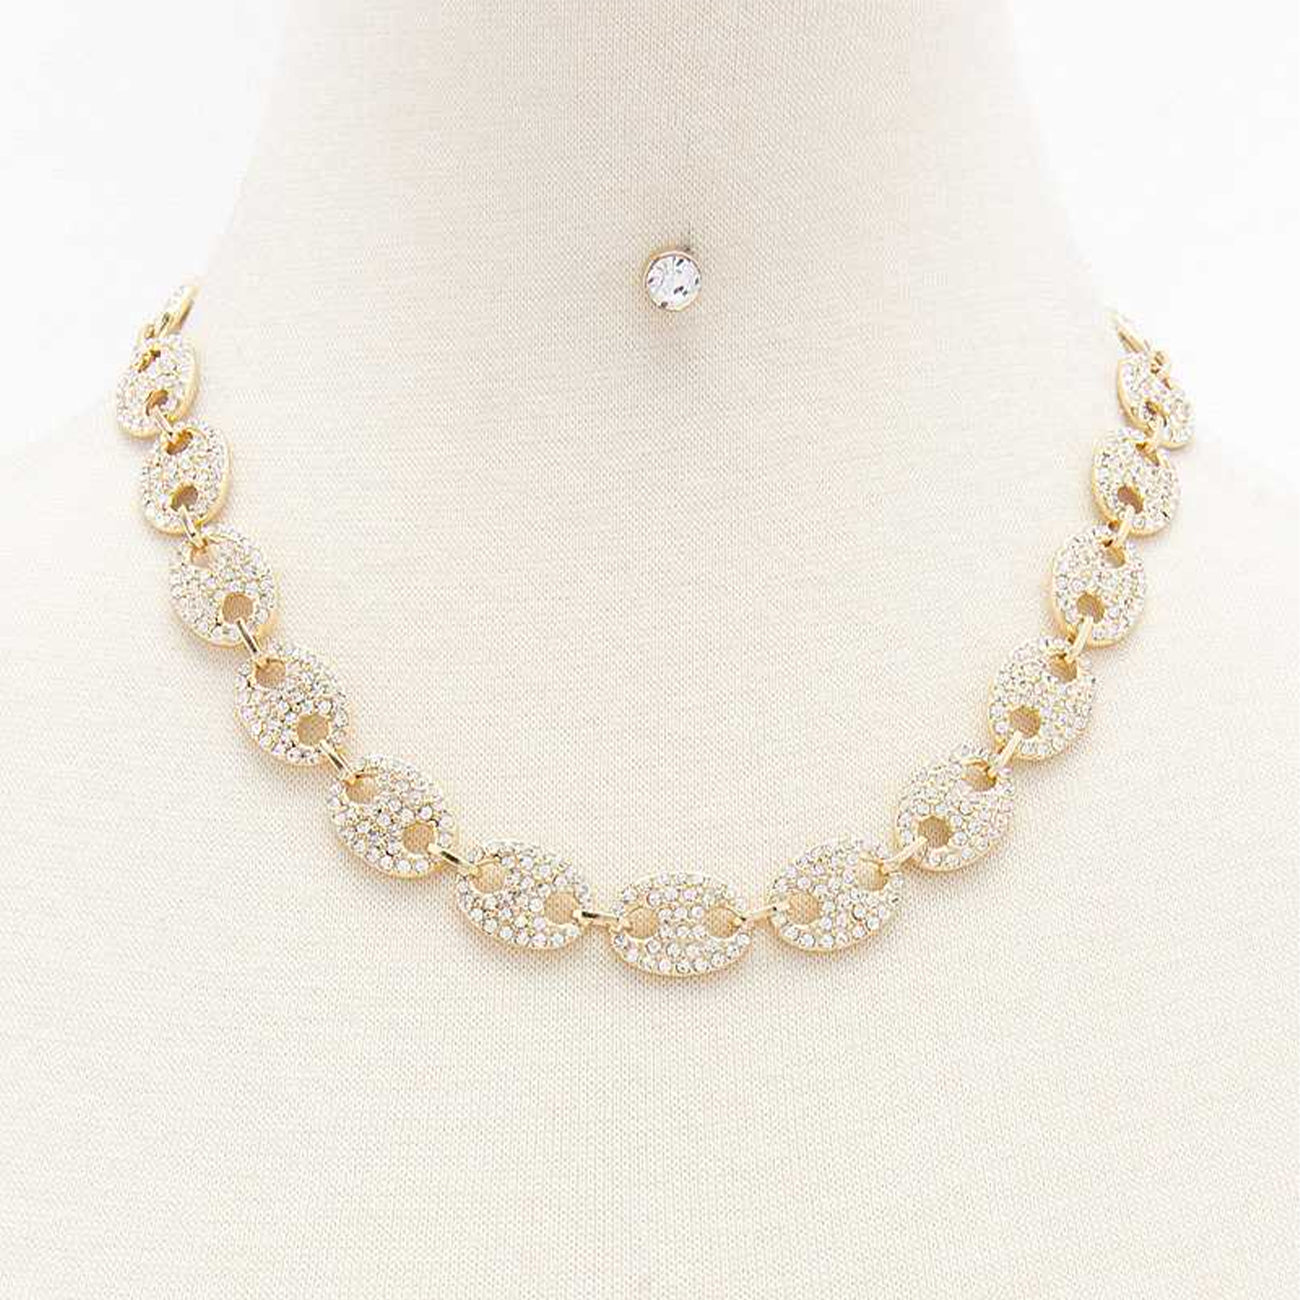 Gold Rhinestone Chain Necklace Earring Set